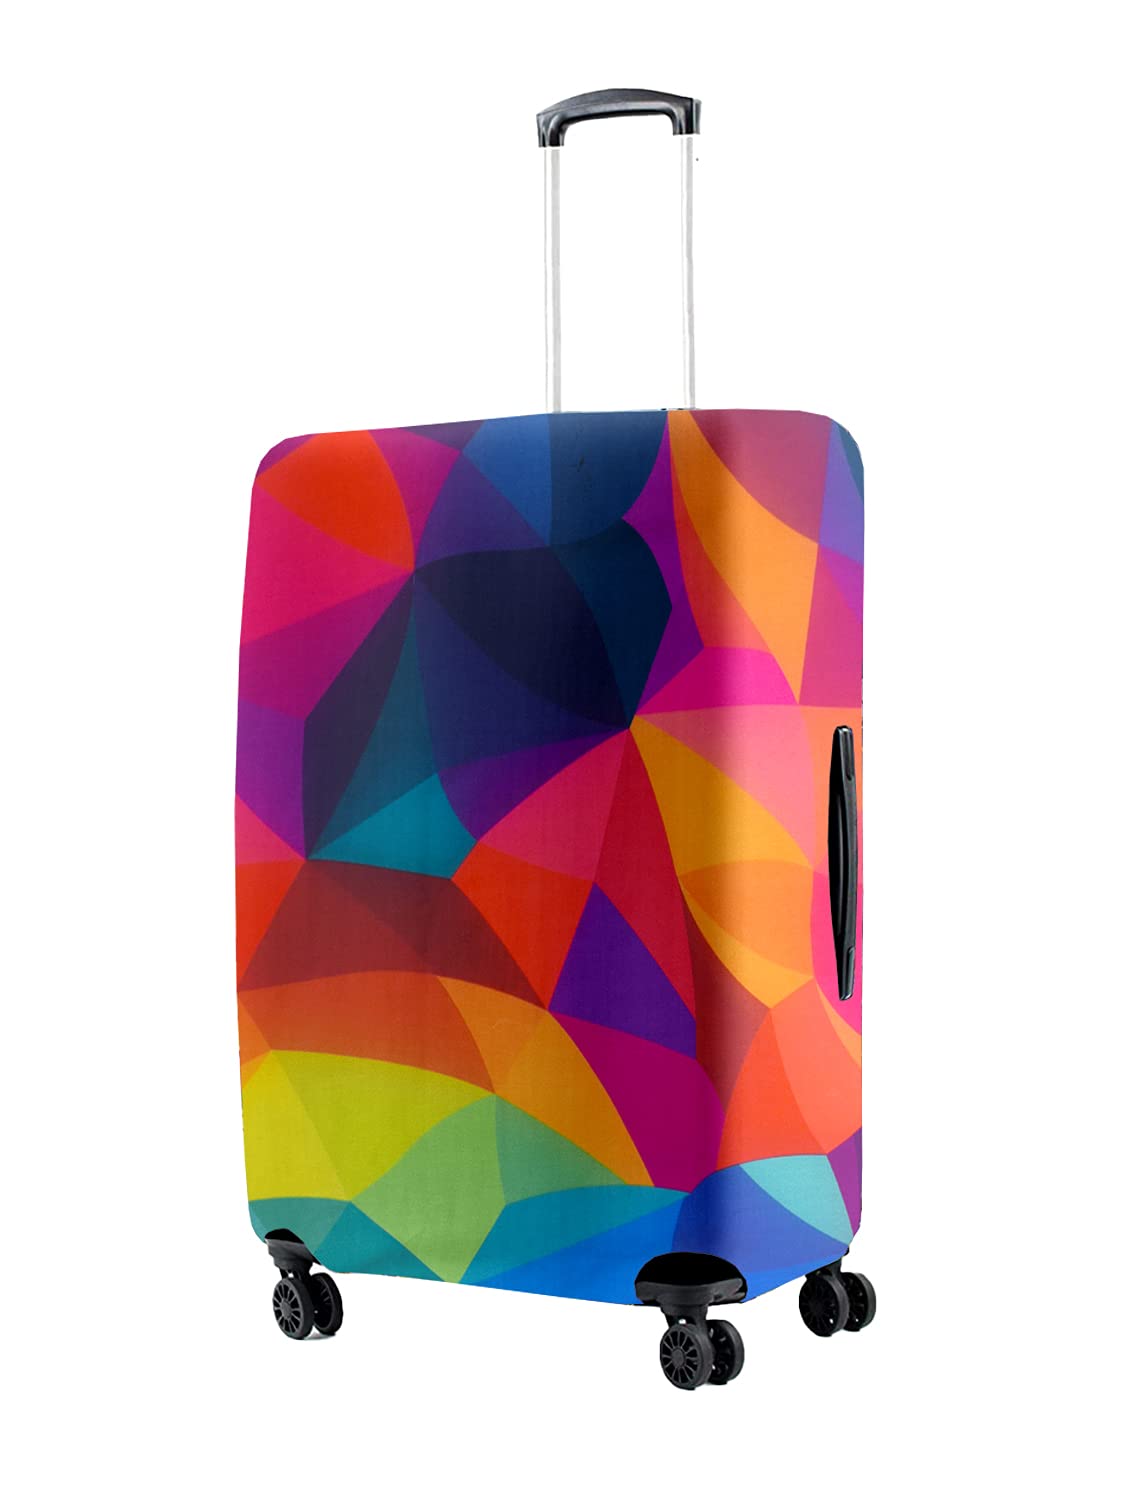 travel-suitcase-cover-wedding-gift-ideas